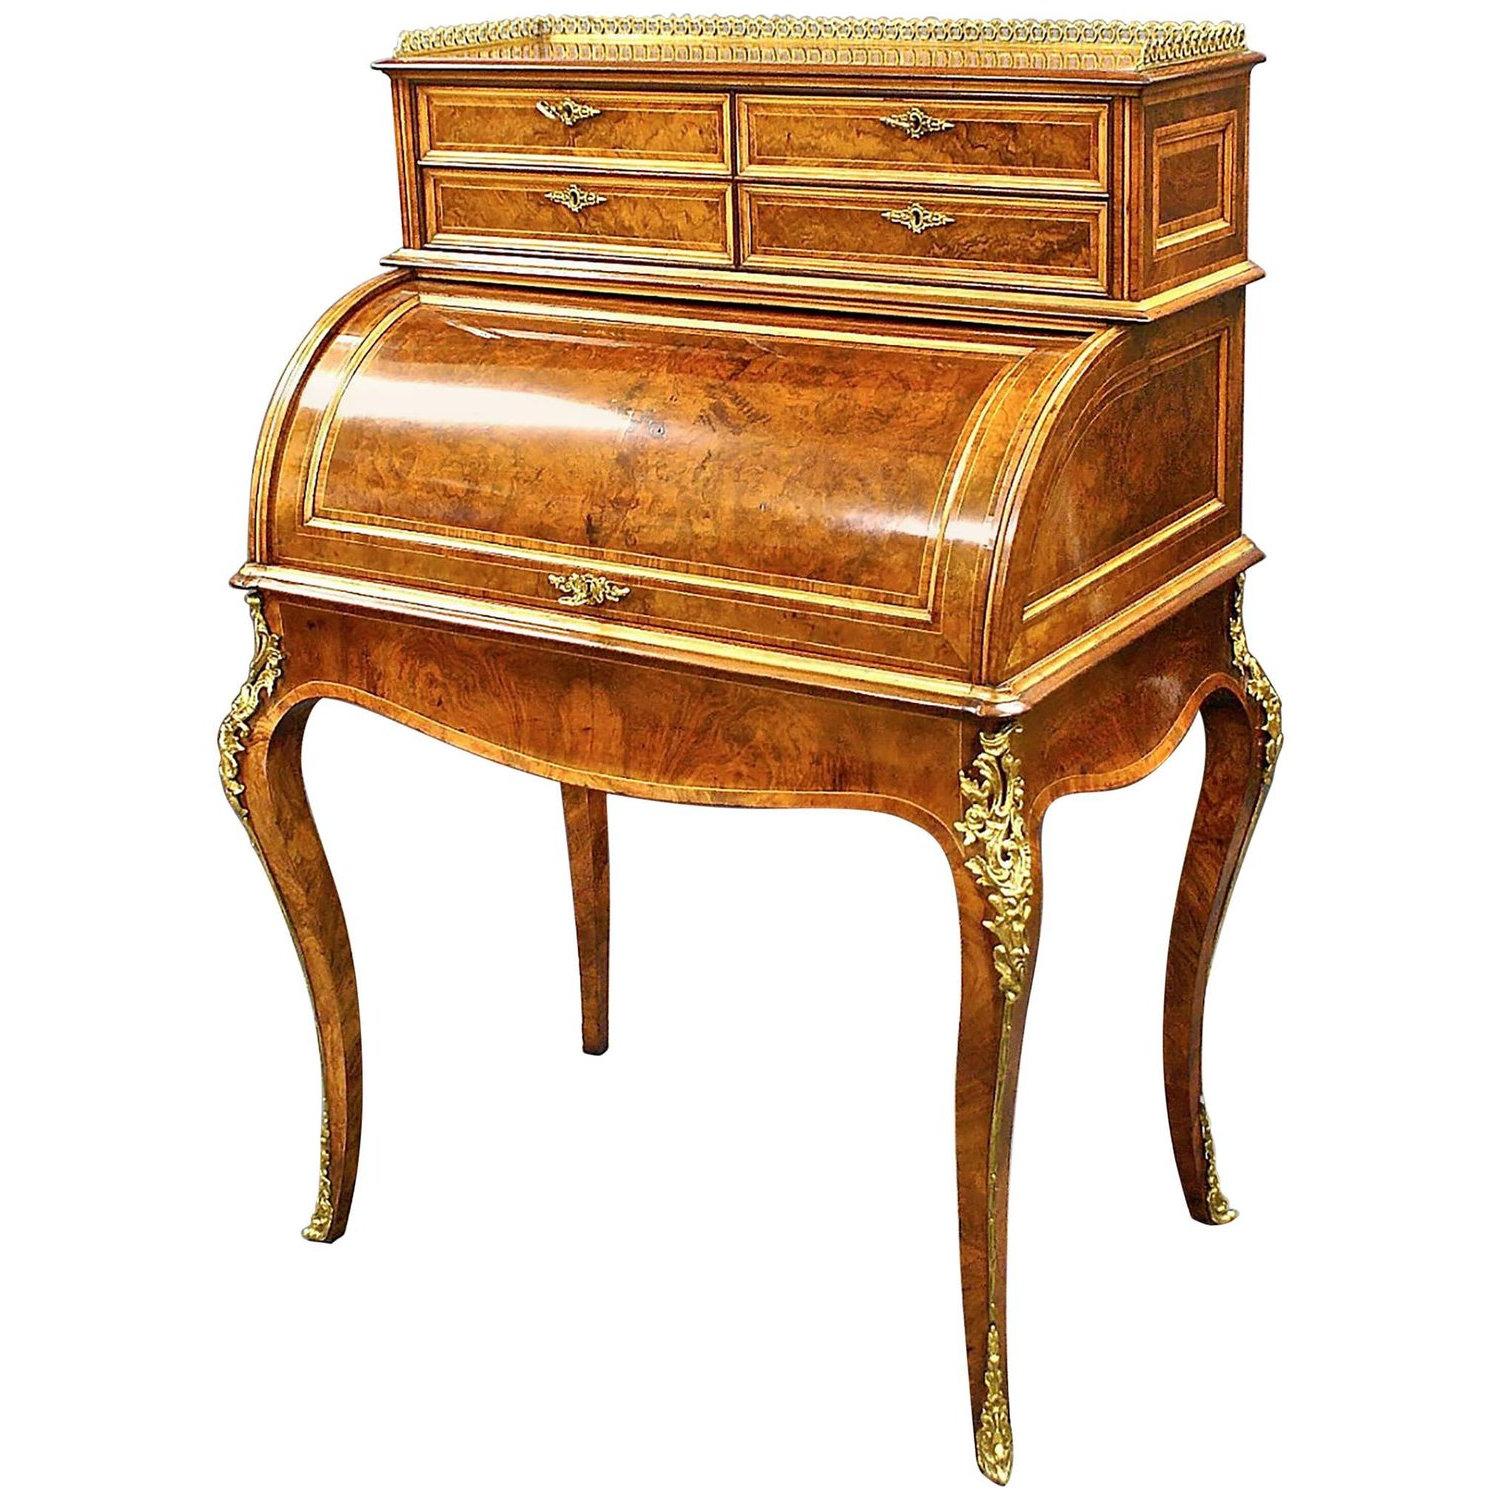 This stunning and excellent quality English burr walnut cylinder bureau features an ornate Ormolu trim, pierced gallery and shaped apron that is supported on cabriole legs. The bureau has tulip wood banding and boxwood detailing. The interior